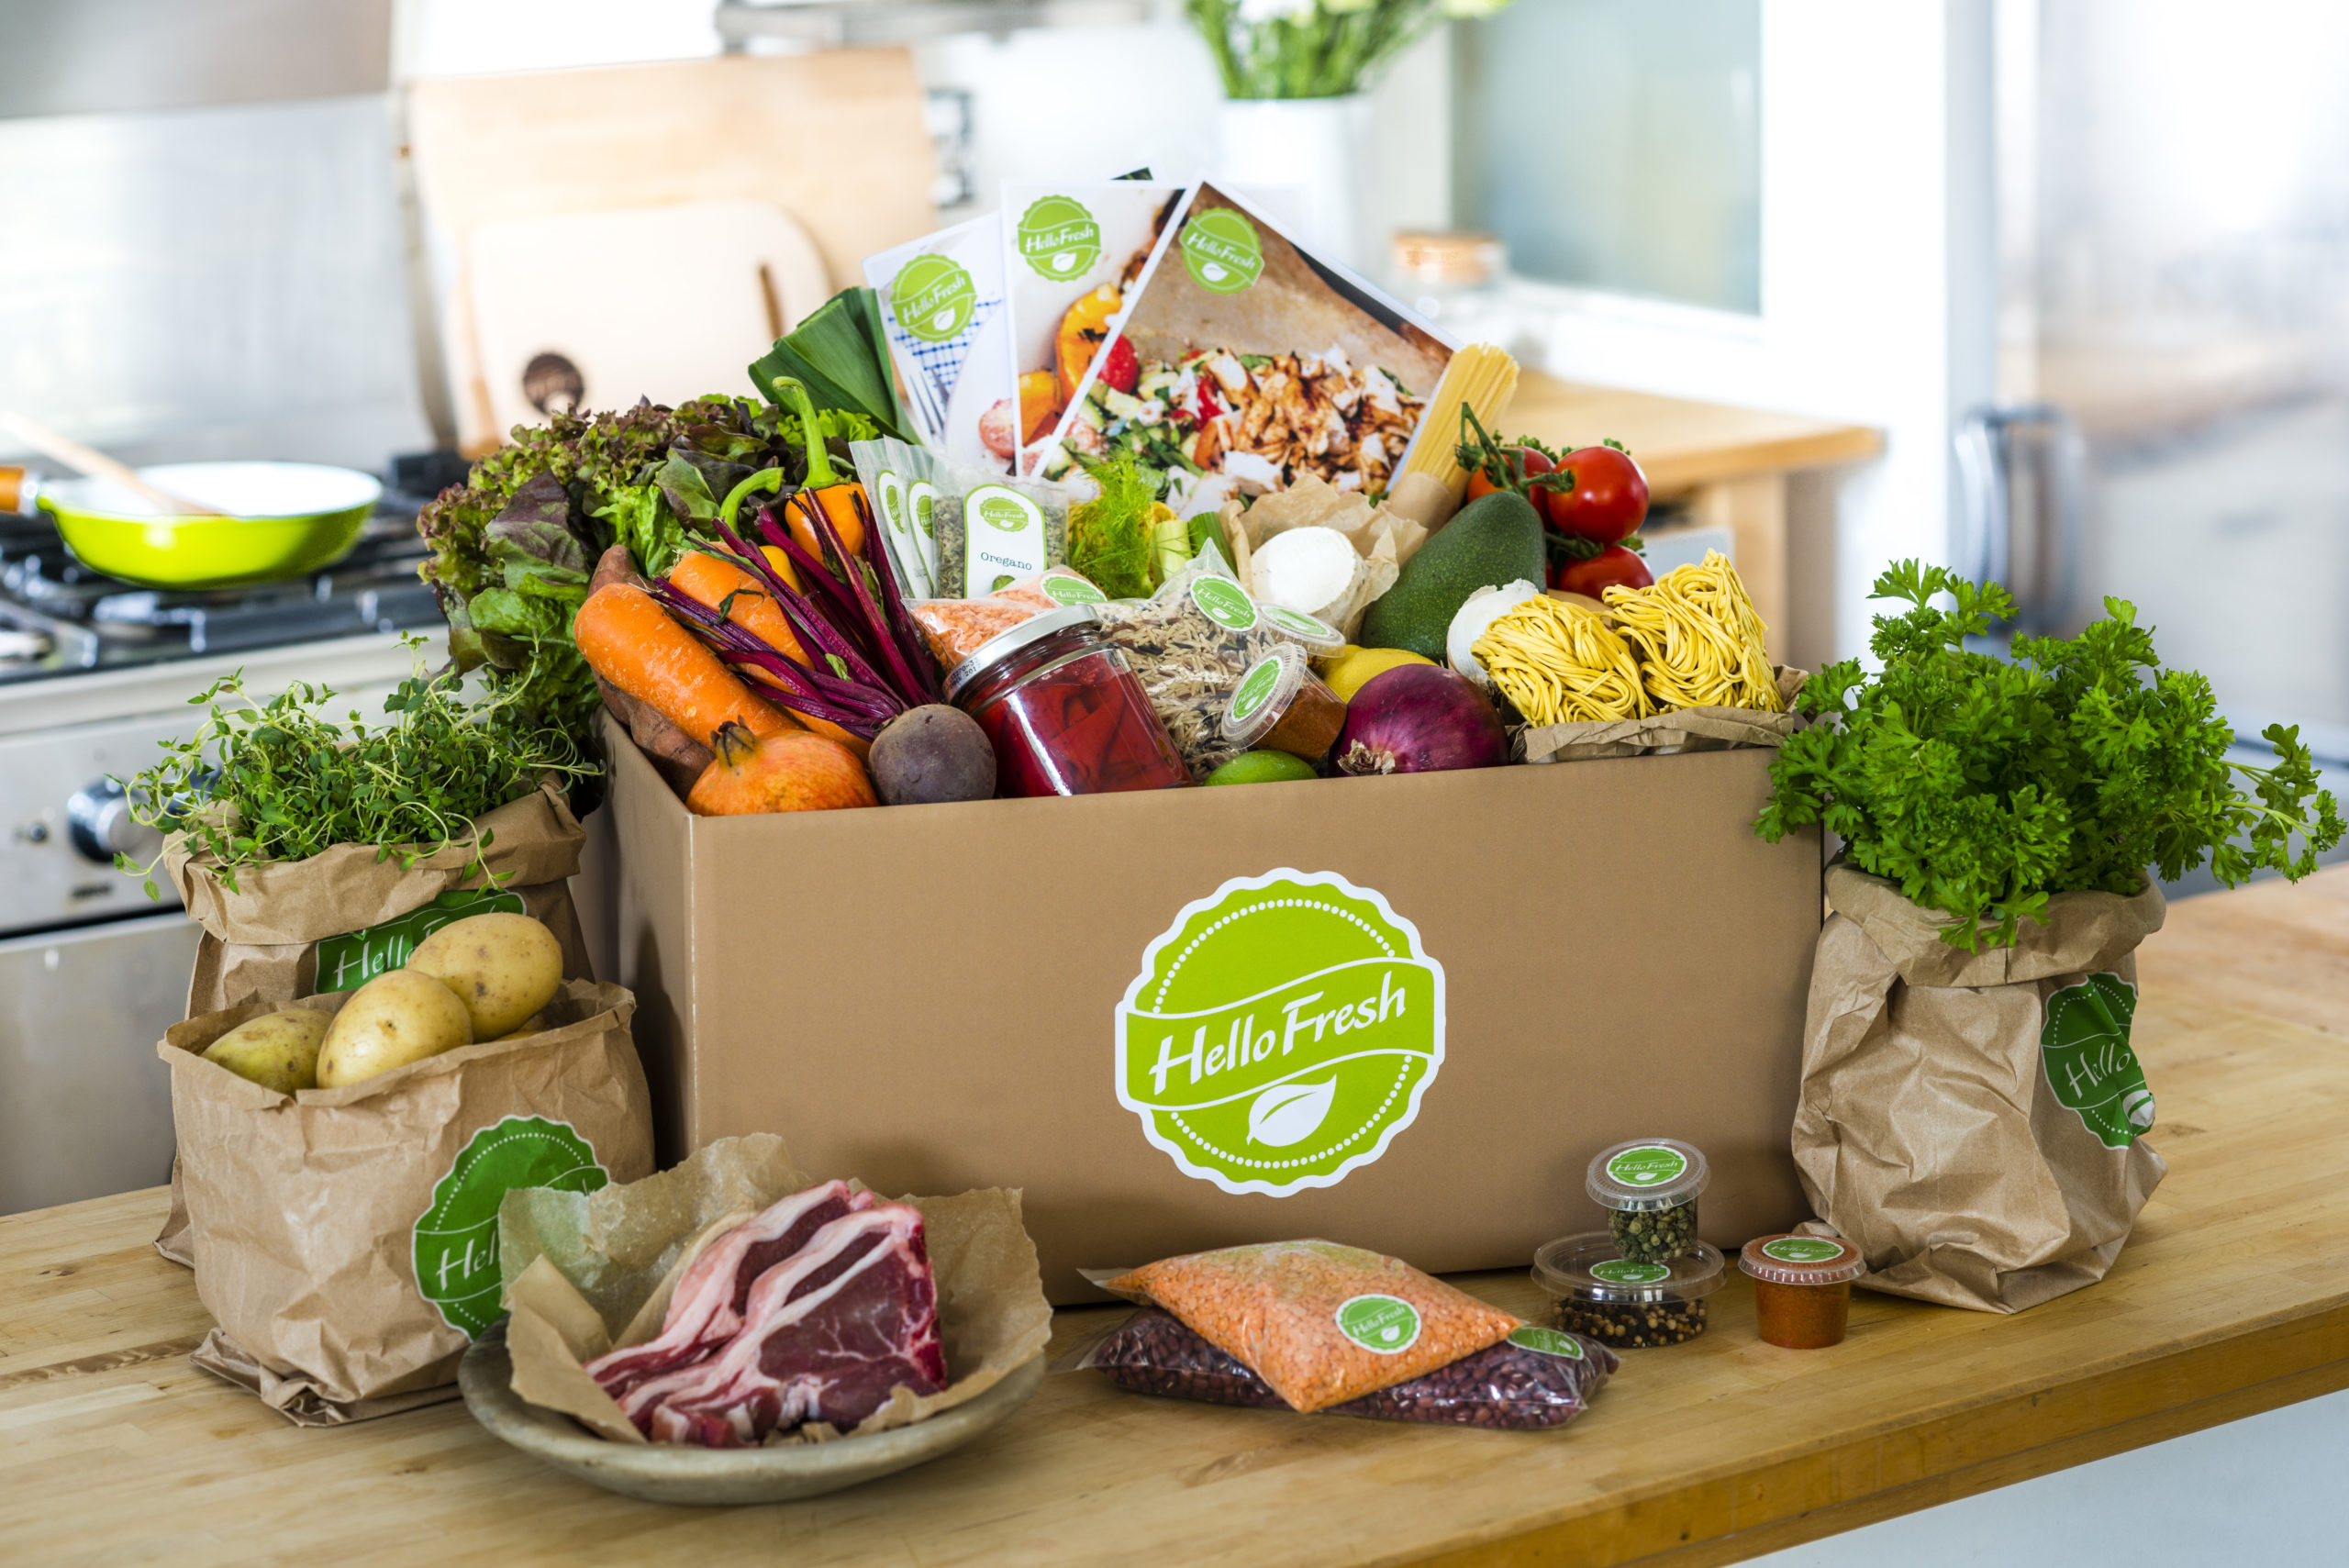 Where does the meat from HelloFresh come from? - Foodly